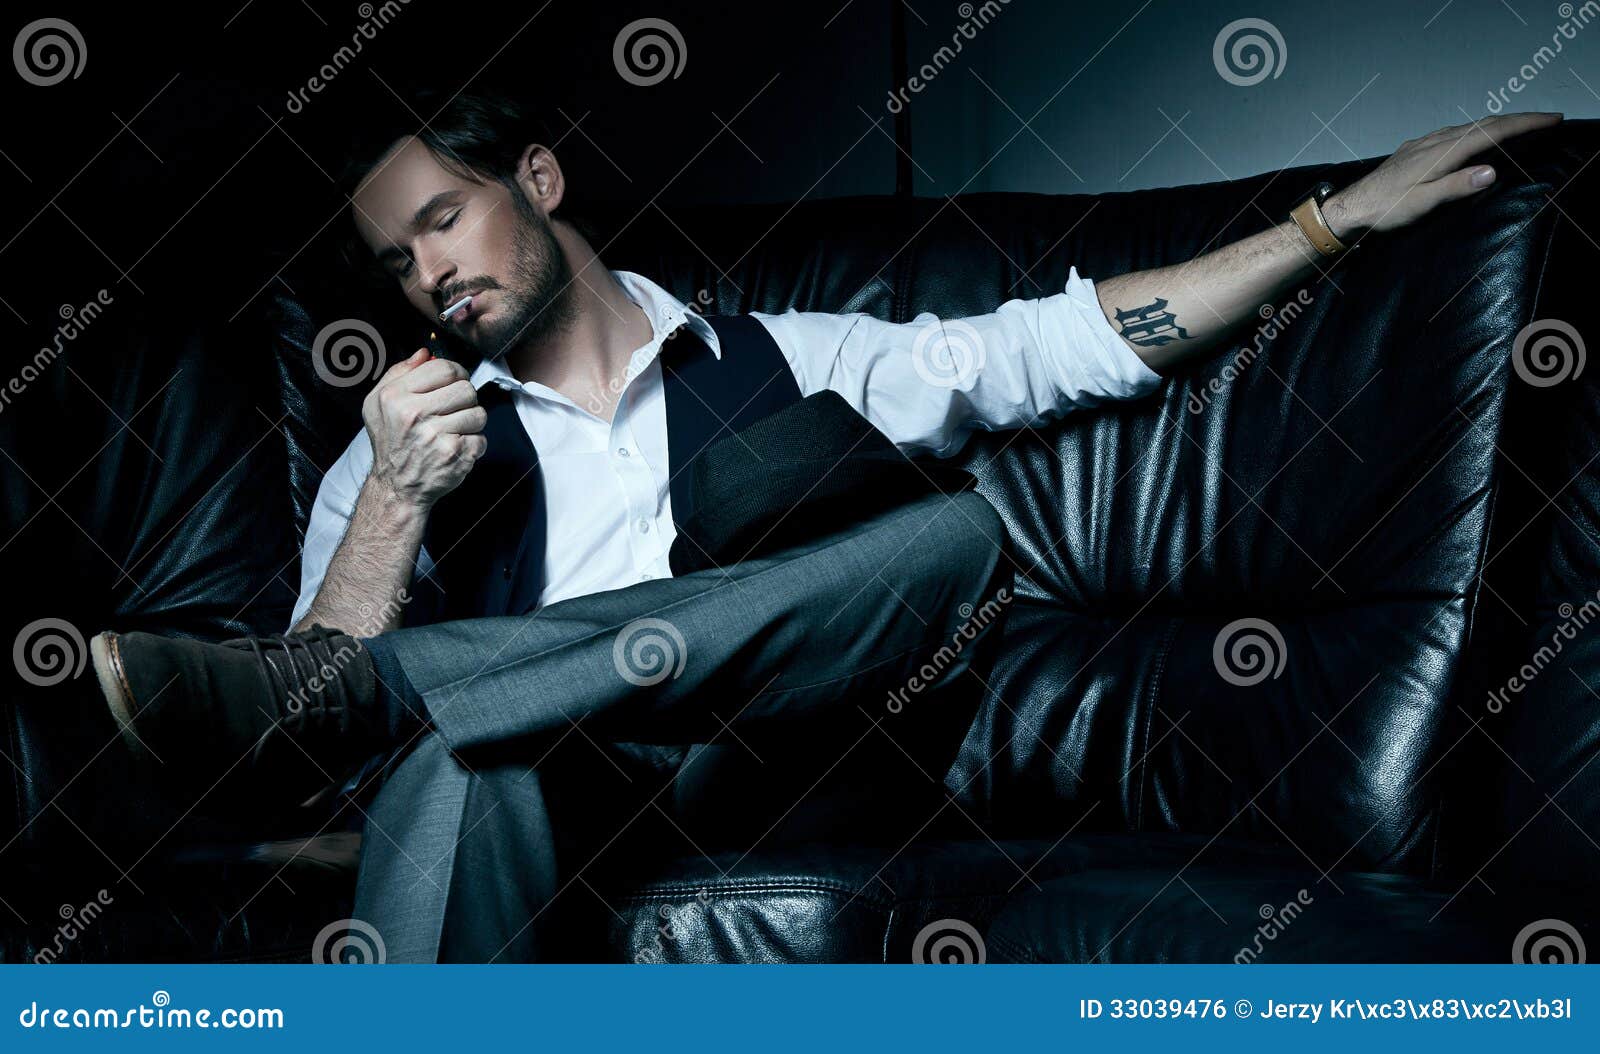  - man-black-couch-sexy-brunet-smoking-cigarette-33039476